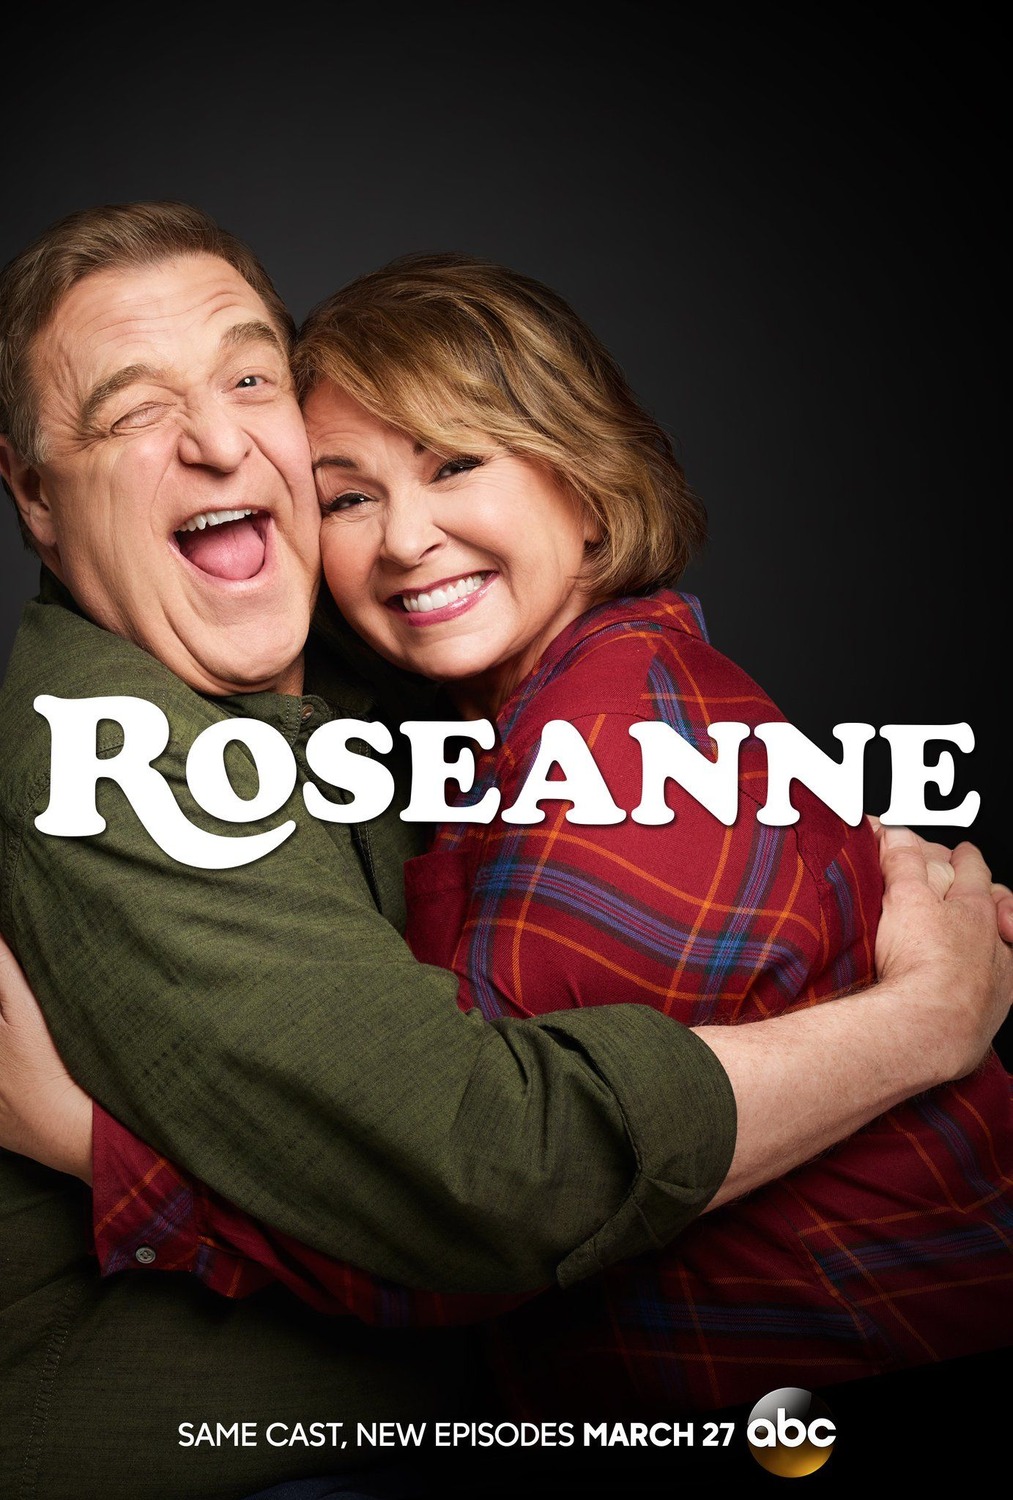 Extra Large TV Poster Image for Roseanne (#1 of 2)